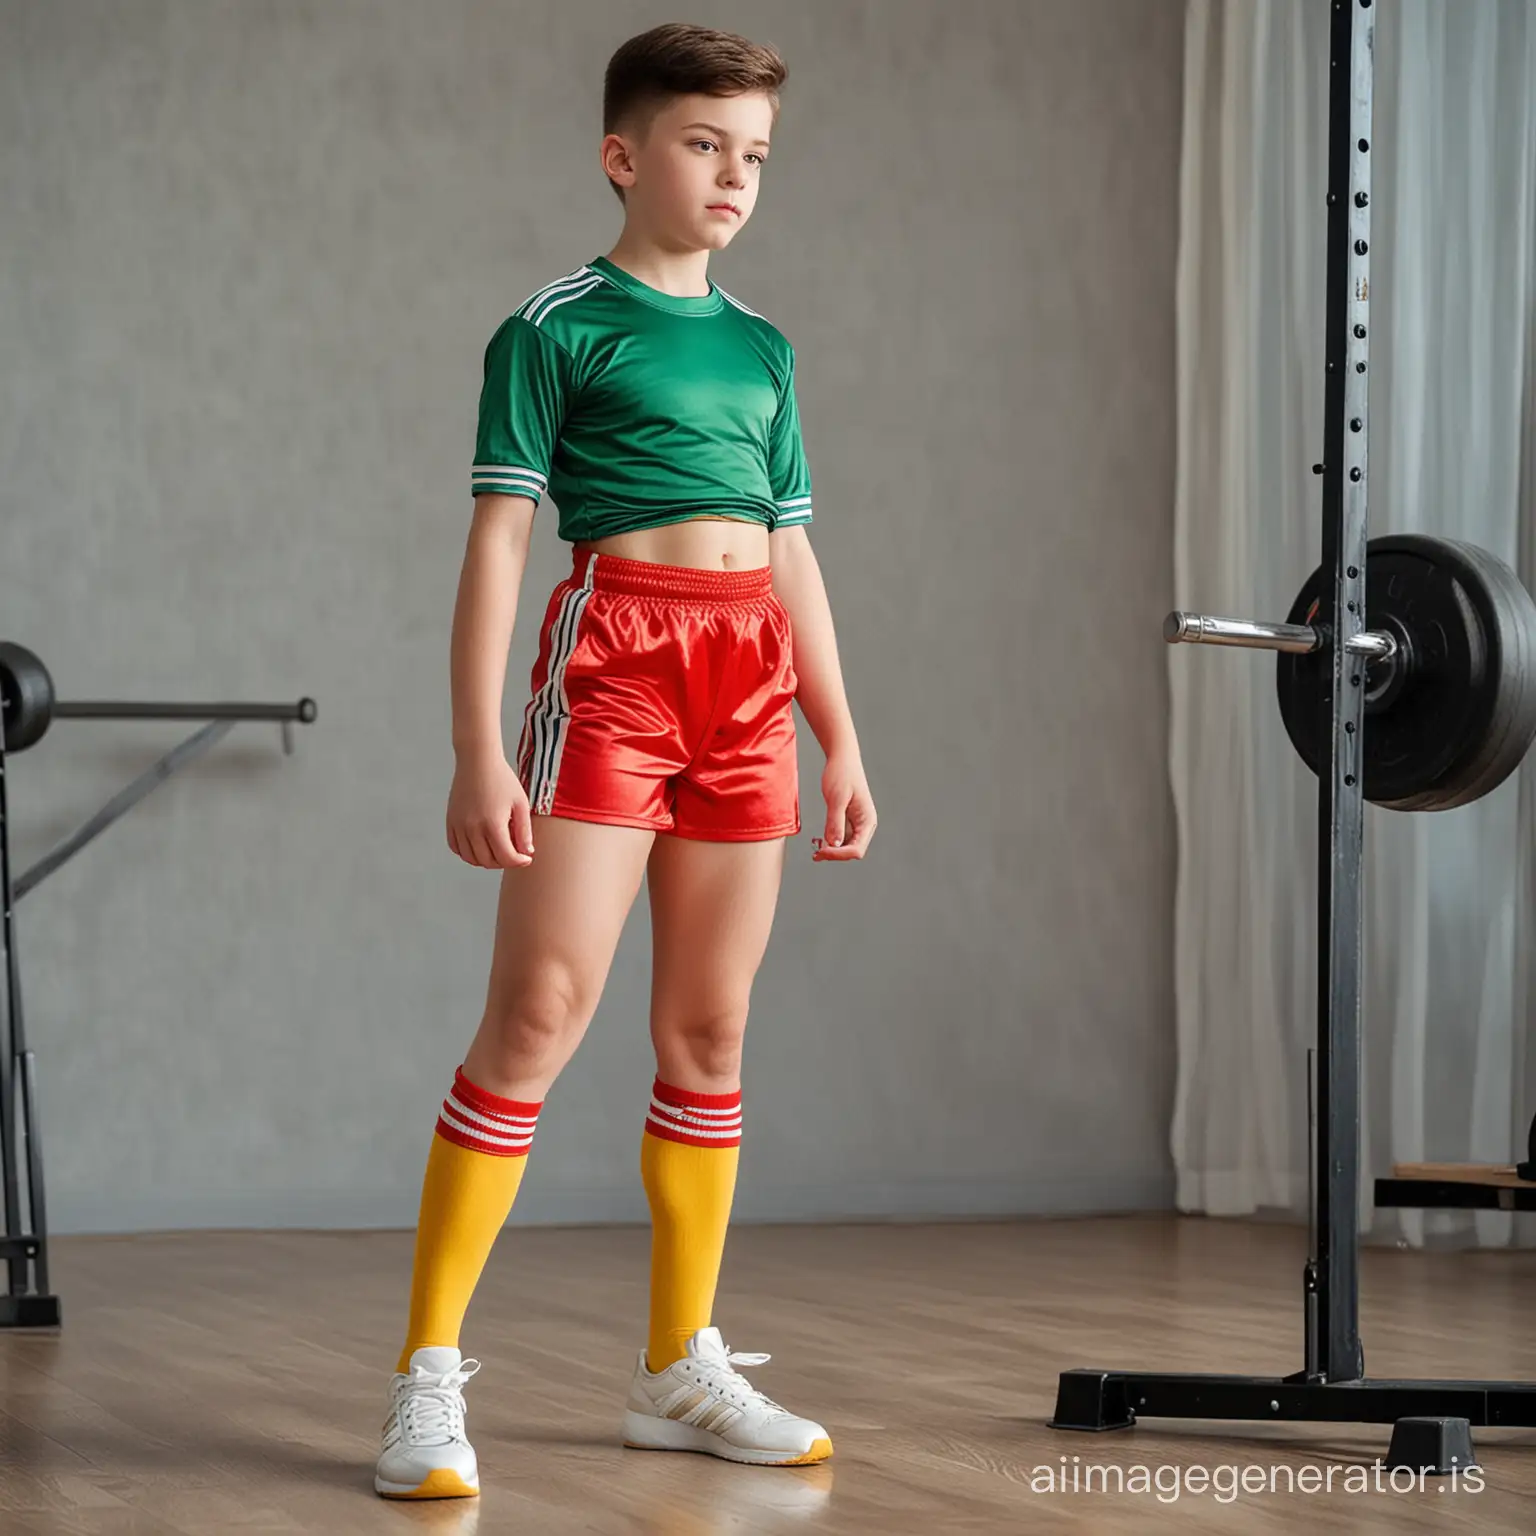 Teenage-Boy-Exercising-with-Dumbbells-in-Colorful-Gym-Outfit